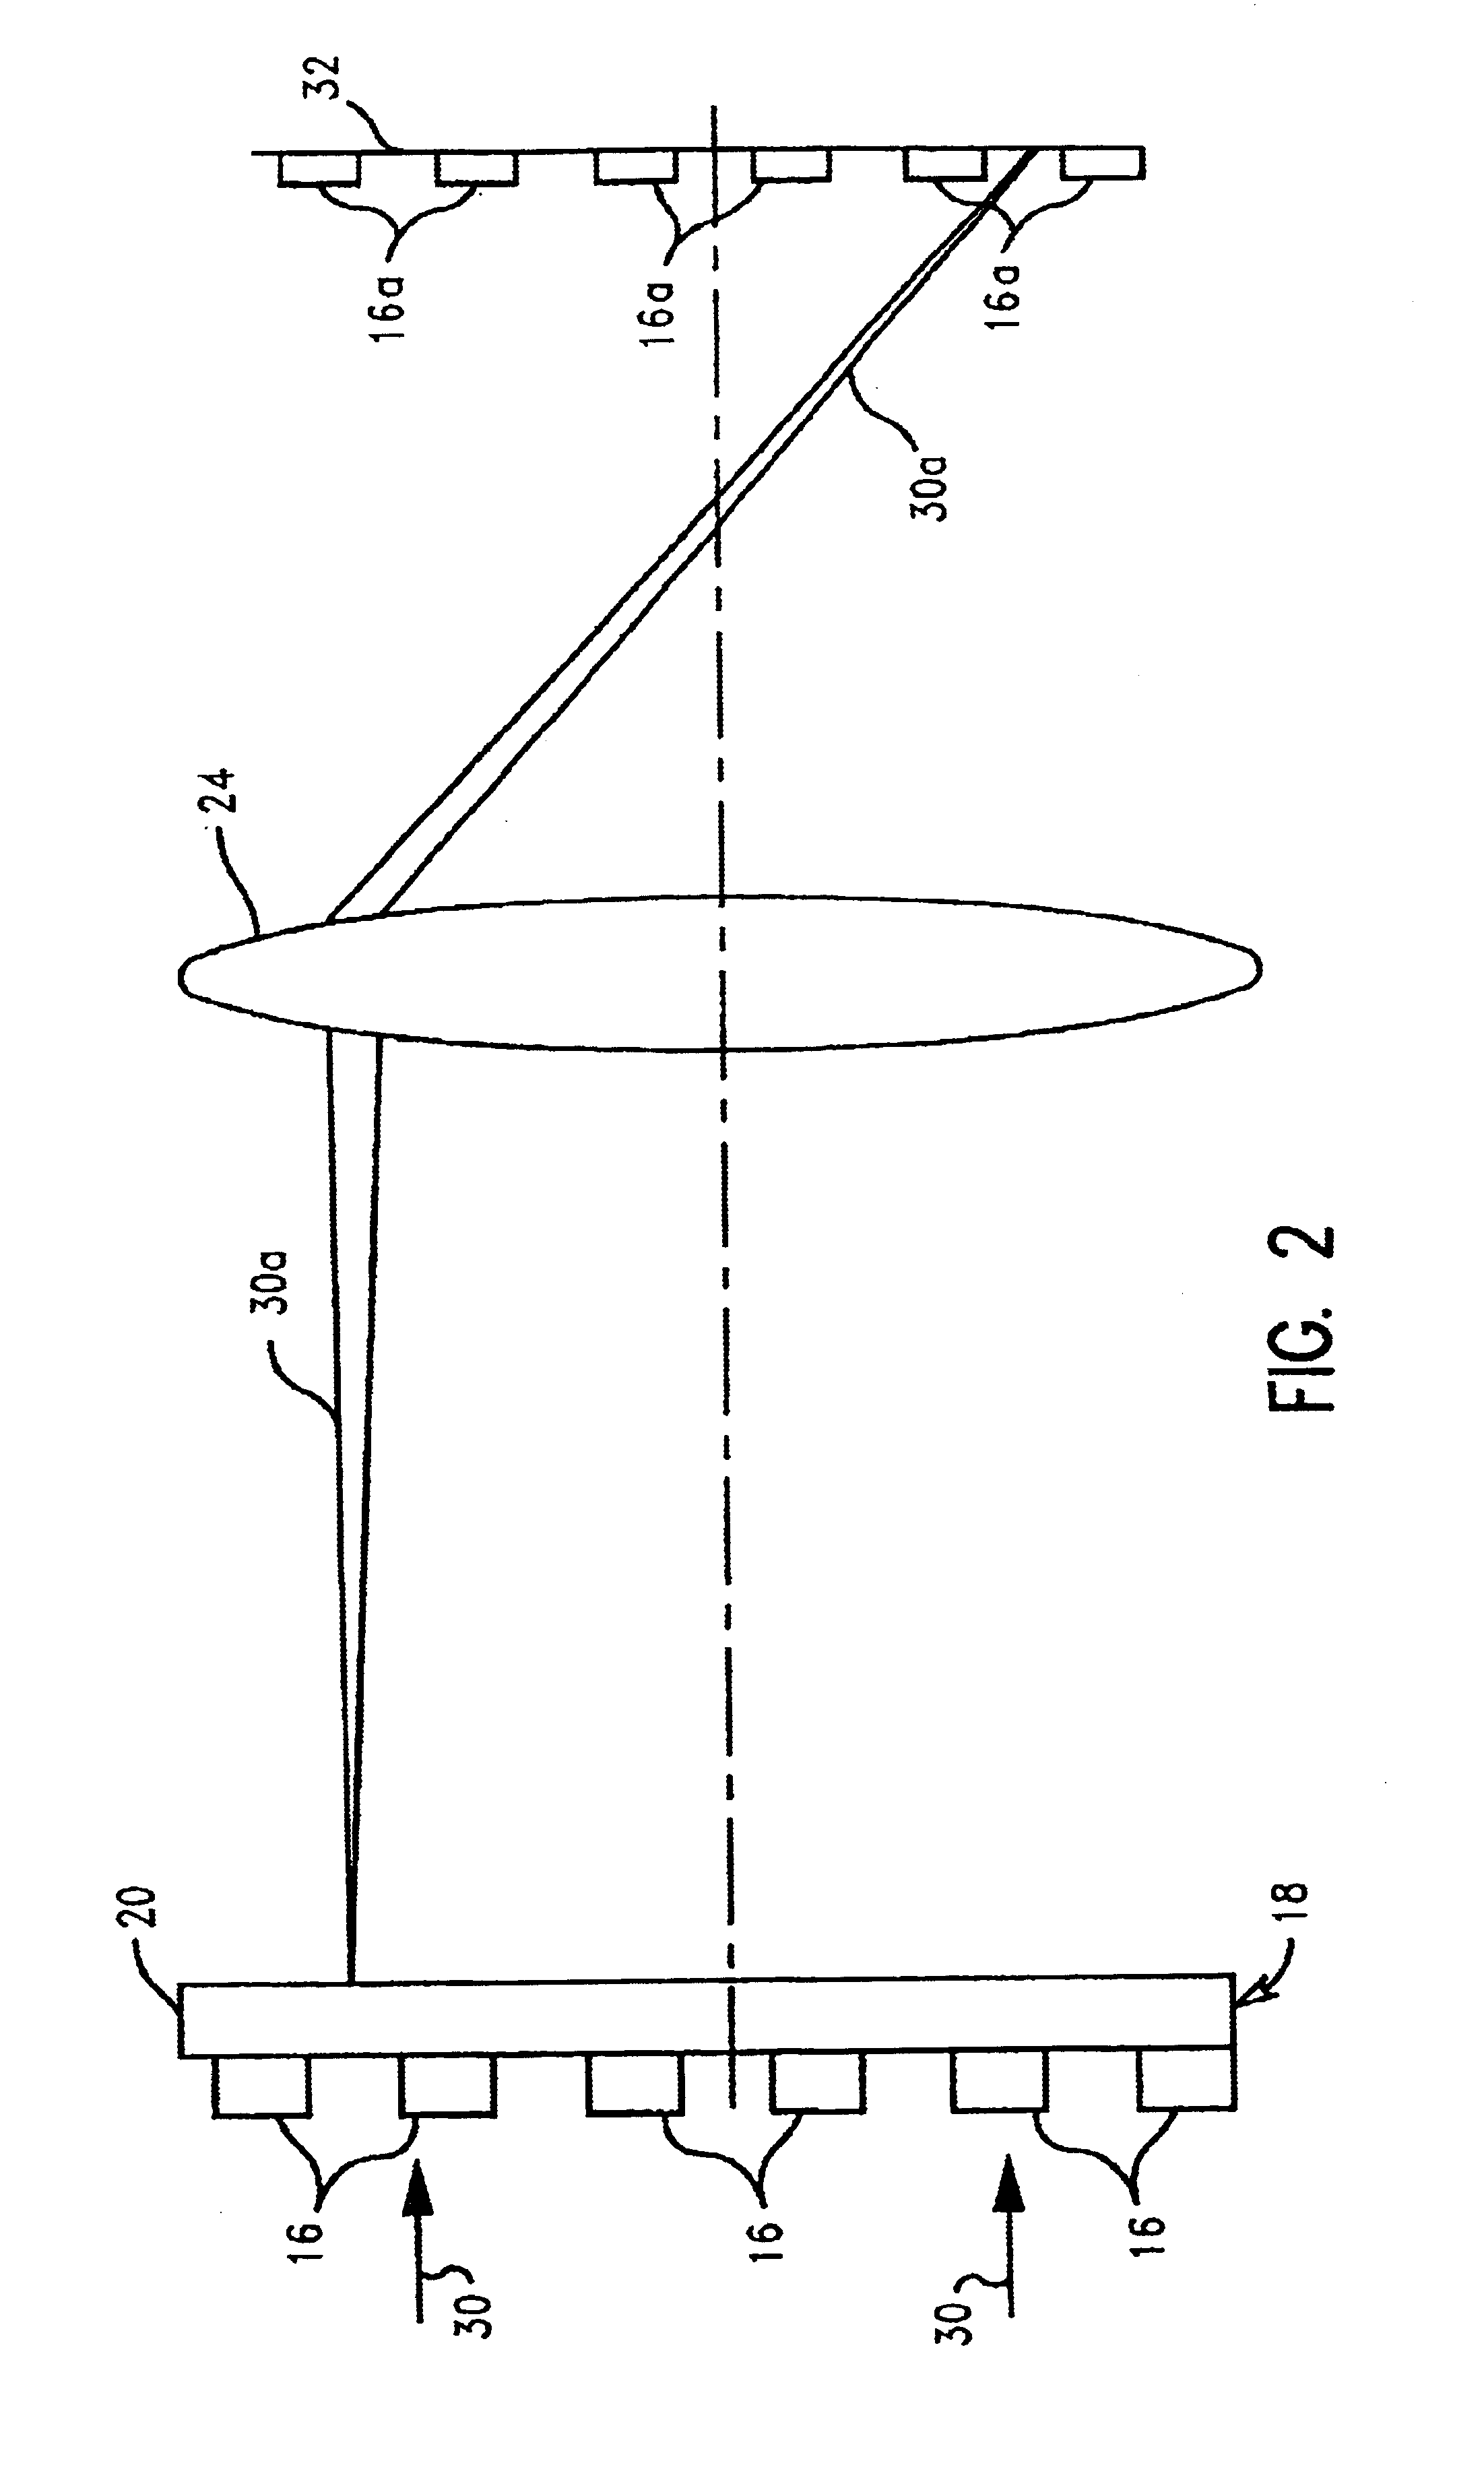 Single tone process window metrology target and method for lithographic processing